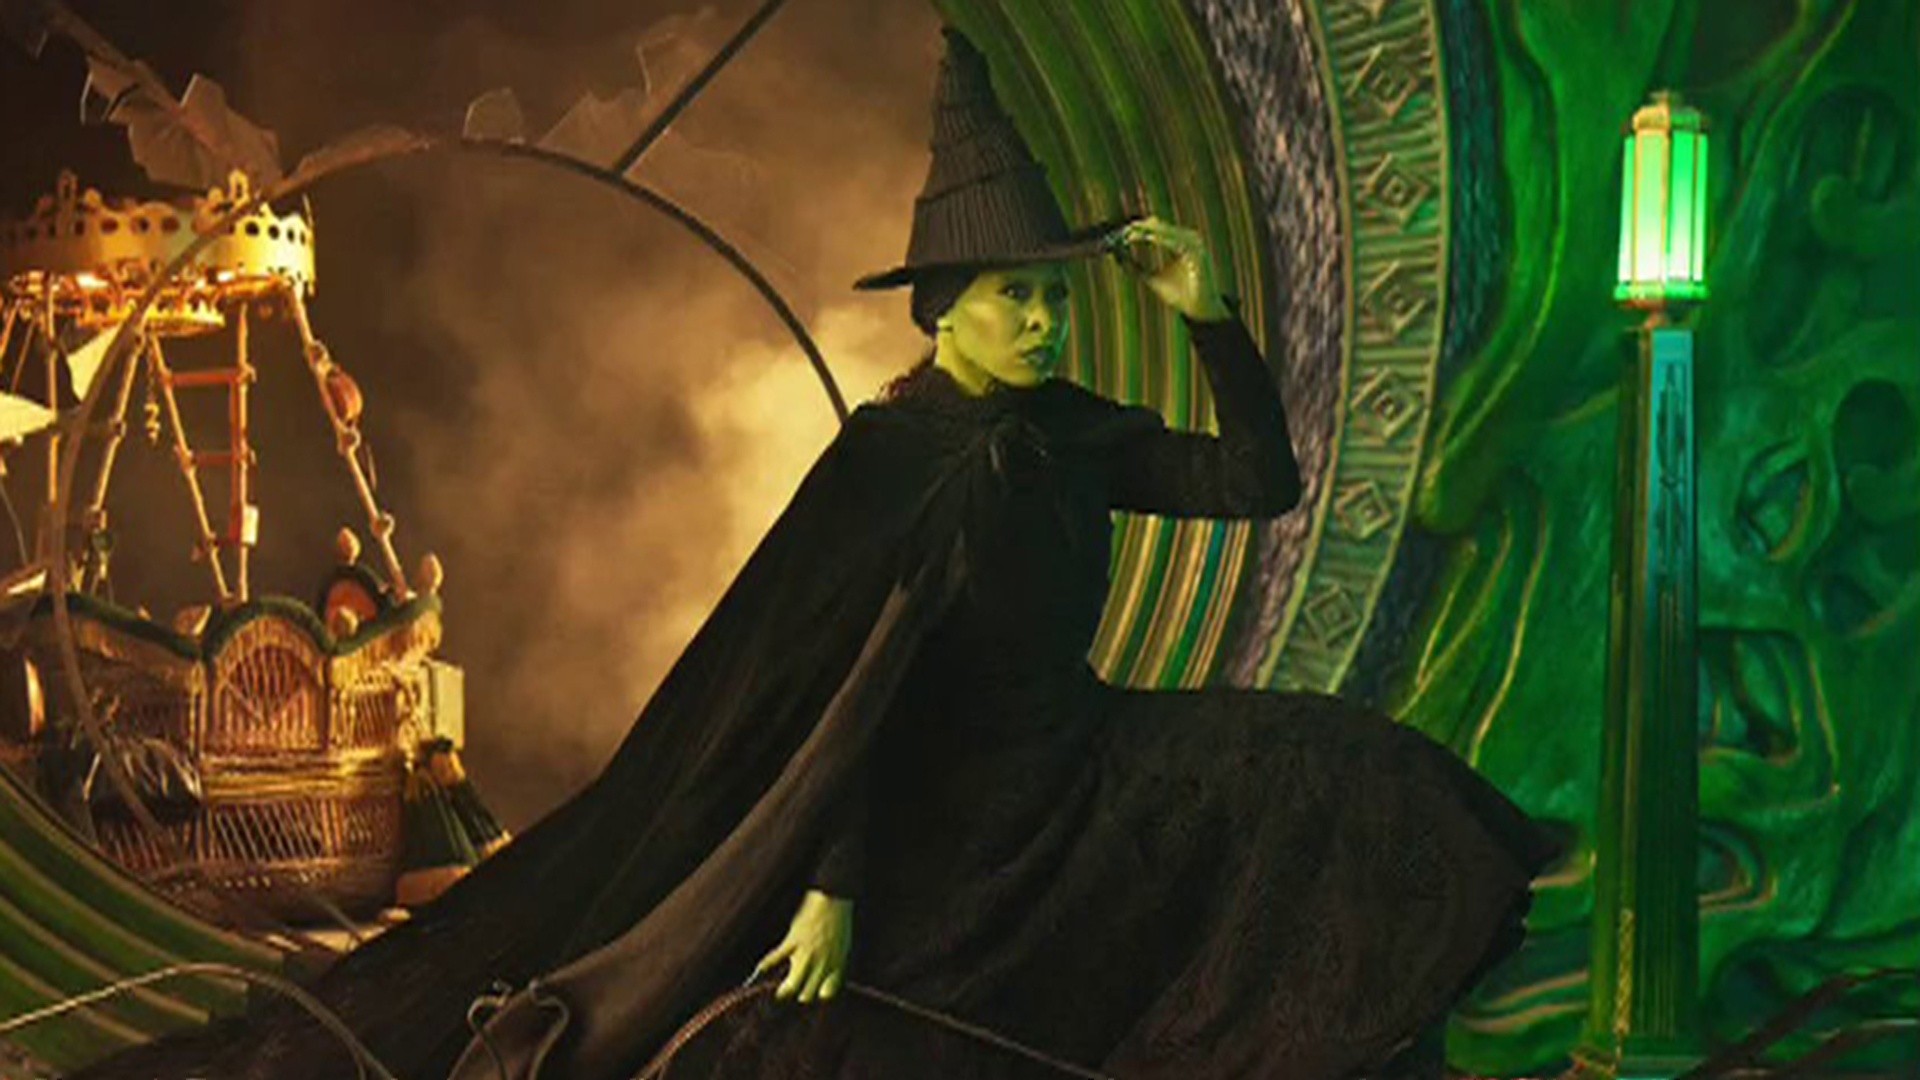 Get a first look at new 'Wicked' movie cast photos